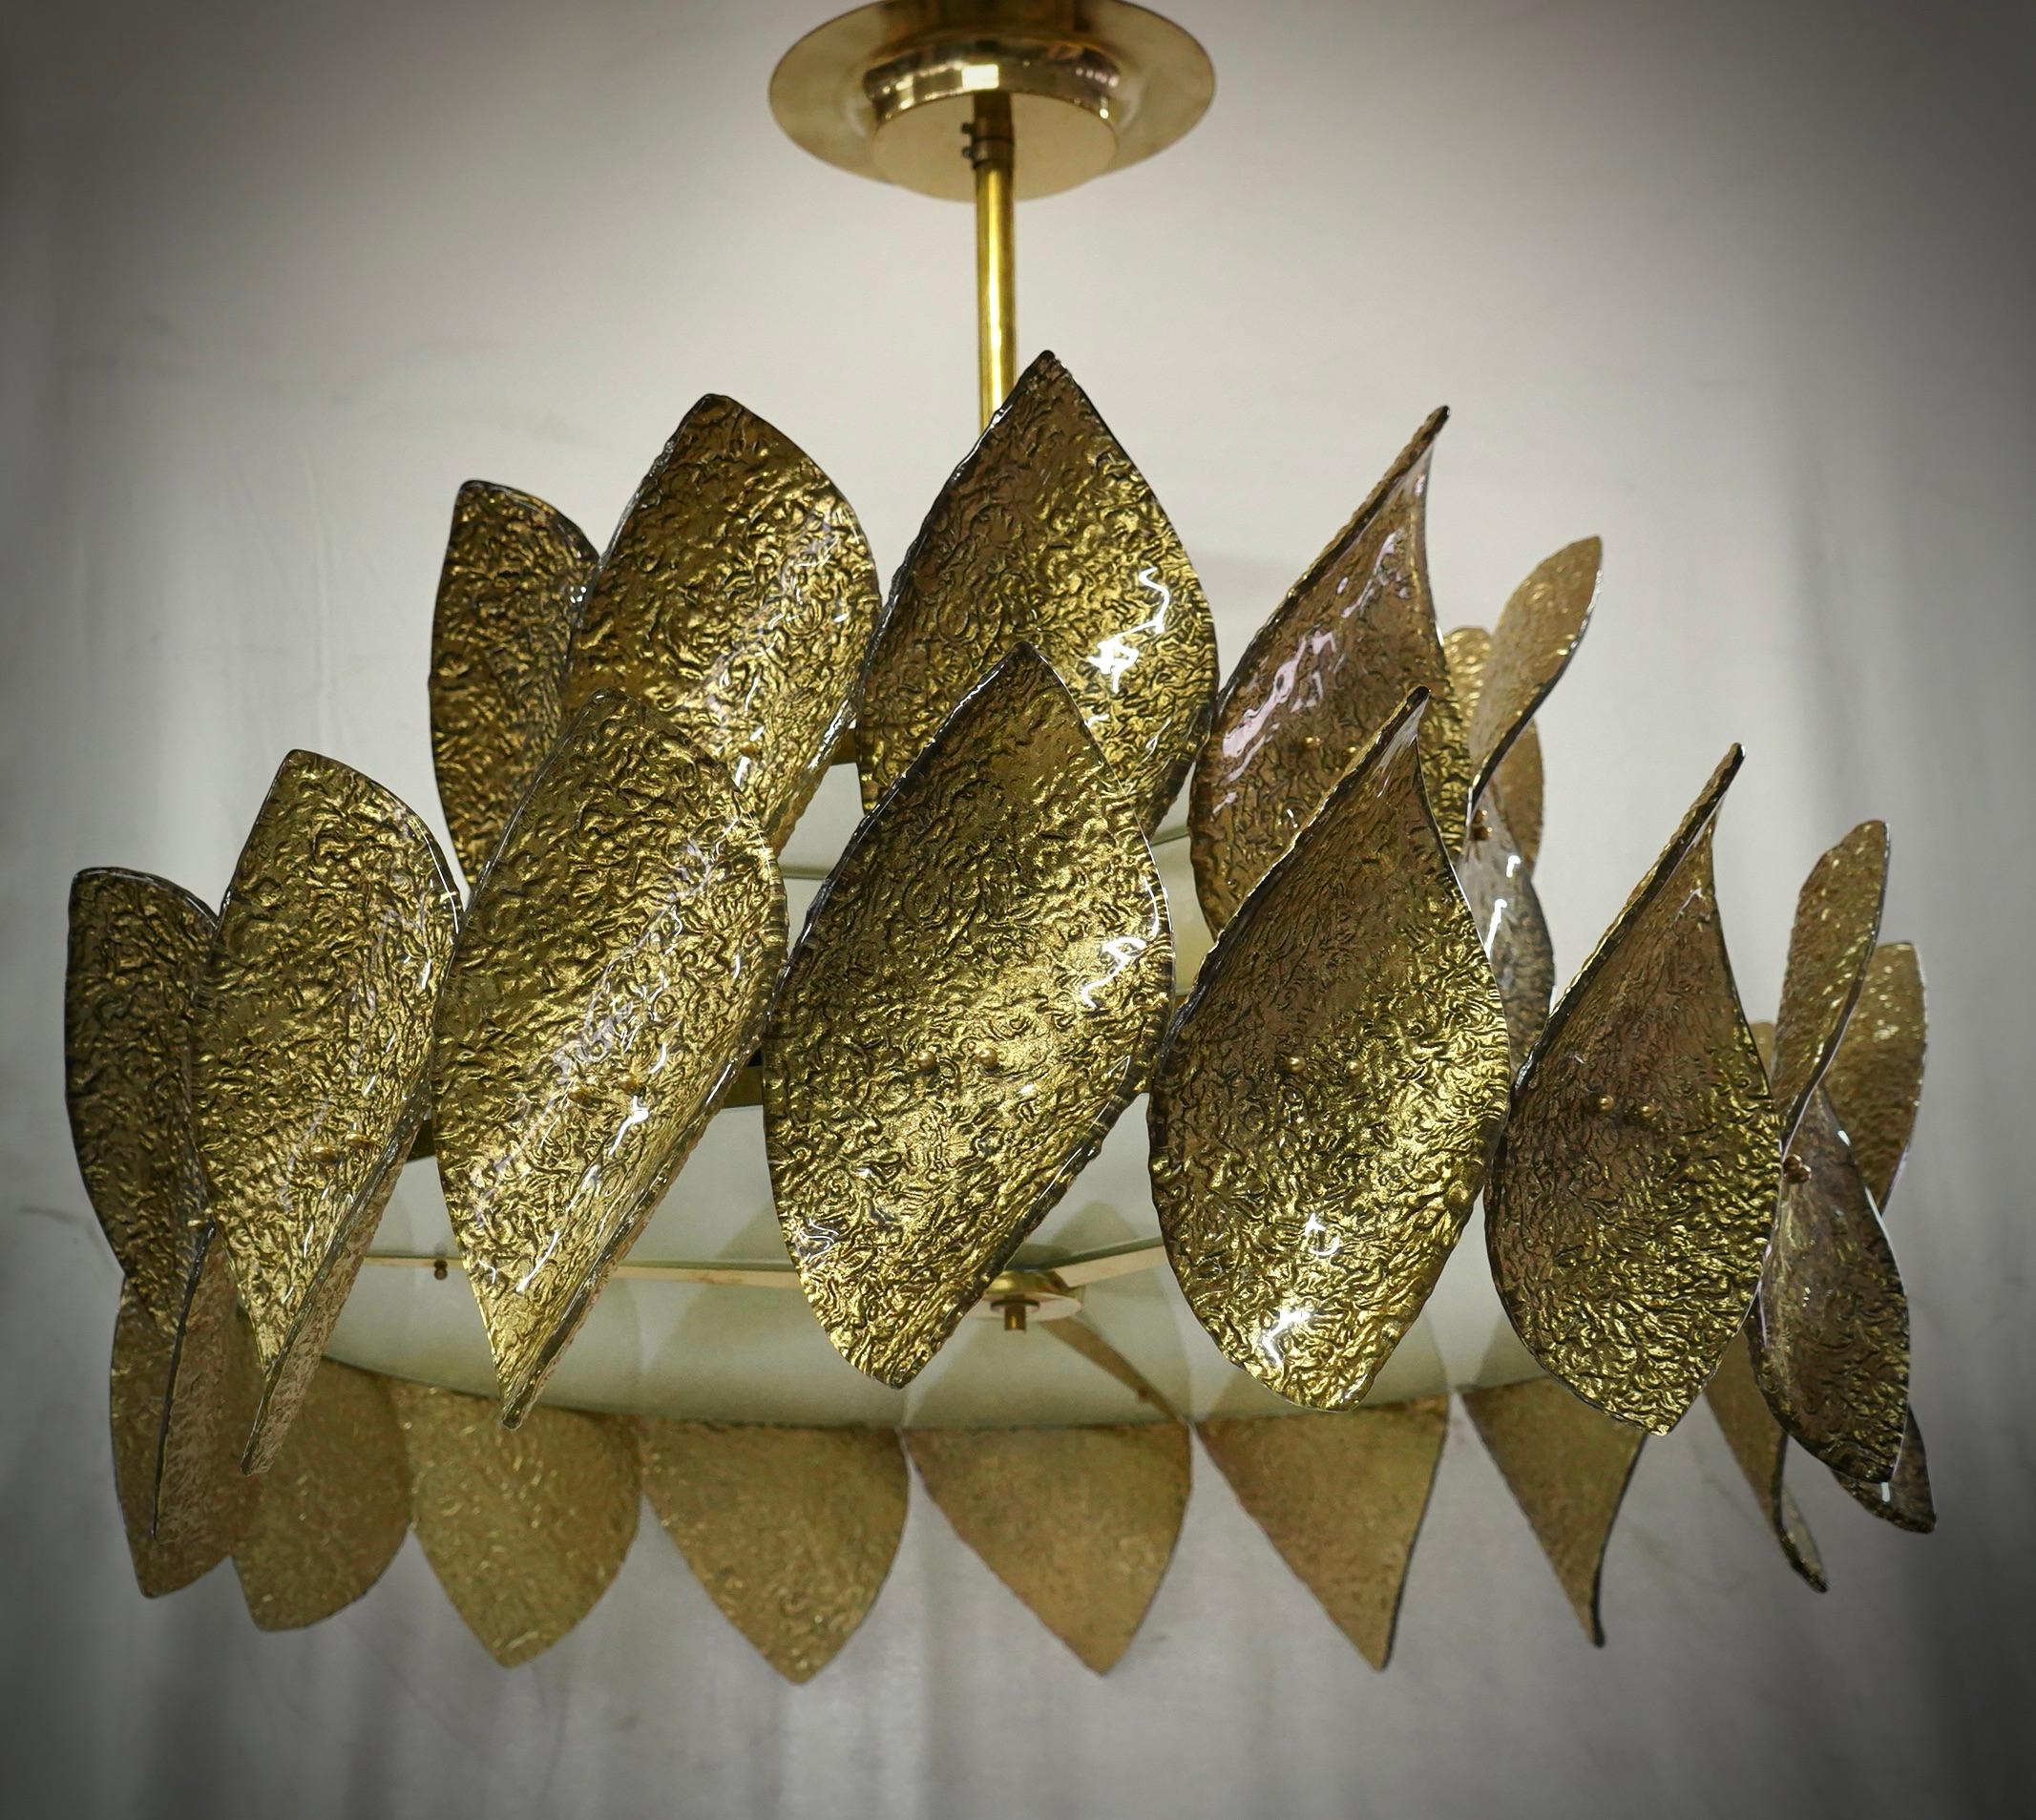 A riot of leaves, with an elegant gold colour. Very beautiful, rich and original design. Fantastic round chandelier in Murano glass and polished brass. Note the shape of the gold-colored Murano glass leaves, very fine and particular.

Brass